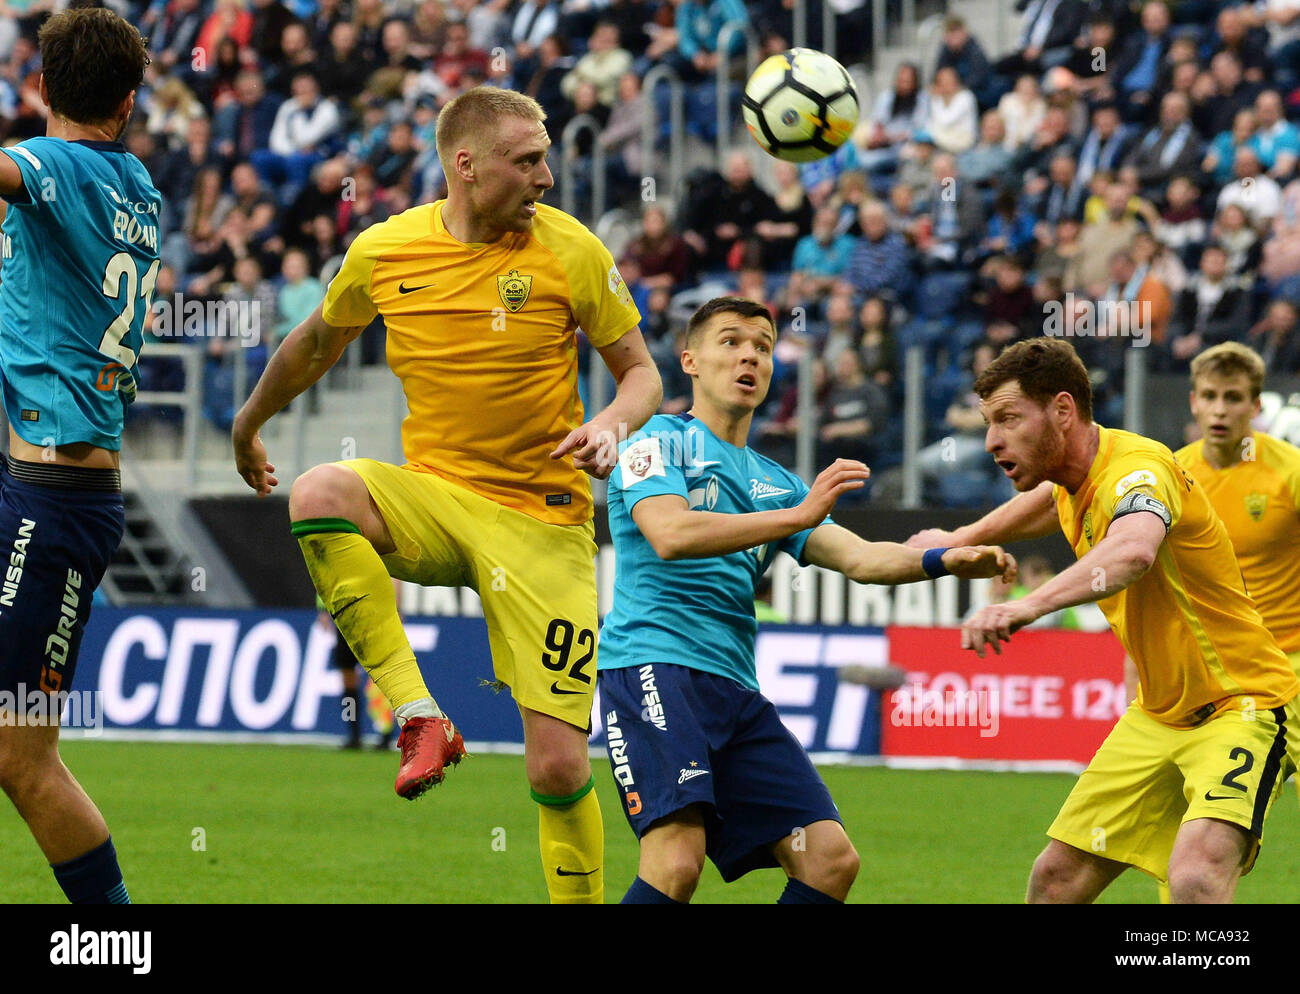 SÃO PETERSBURGO, MO - 14.04.2018: ZENIT X ANZHI - Russia. St. Petersburg. April 14, 2018. Players of ANZHI Sergey Bryzgalov; Guram Tetrashvili and ZENIT Dmitry Poloz (from left to right) in a match of the Russian Football Championship between the ZENIT team (St. Petersburg) and team of ANZHI (Makhachkala). (Photo: Andrey Pronin/Fotoarena) Credit: Foto Arena LTDA/Alamy Live News Stock Photo